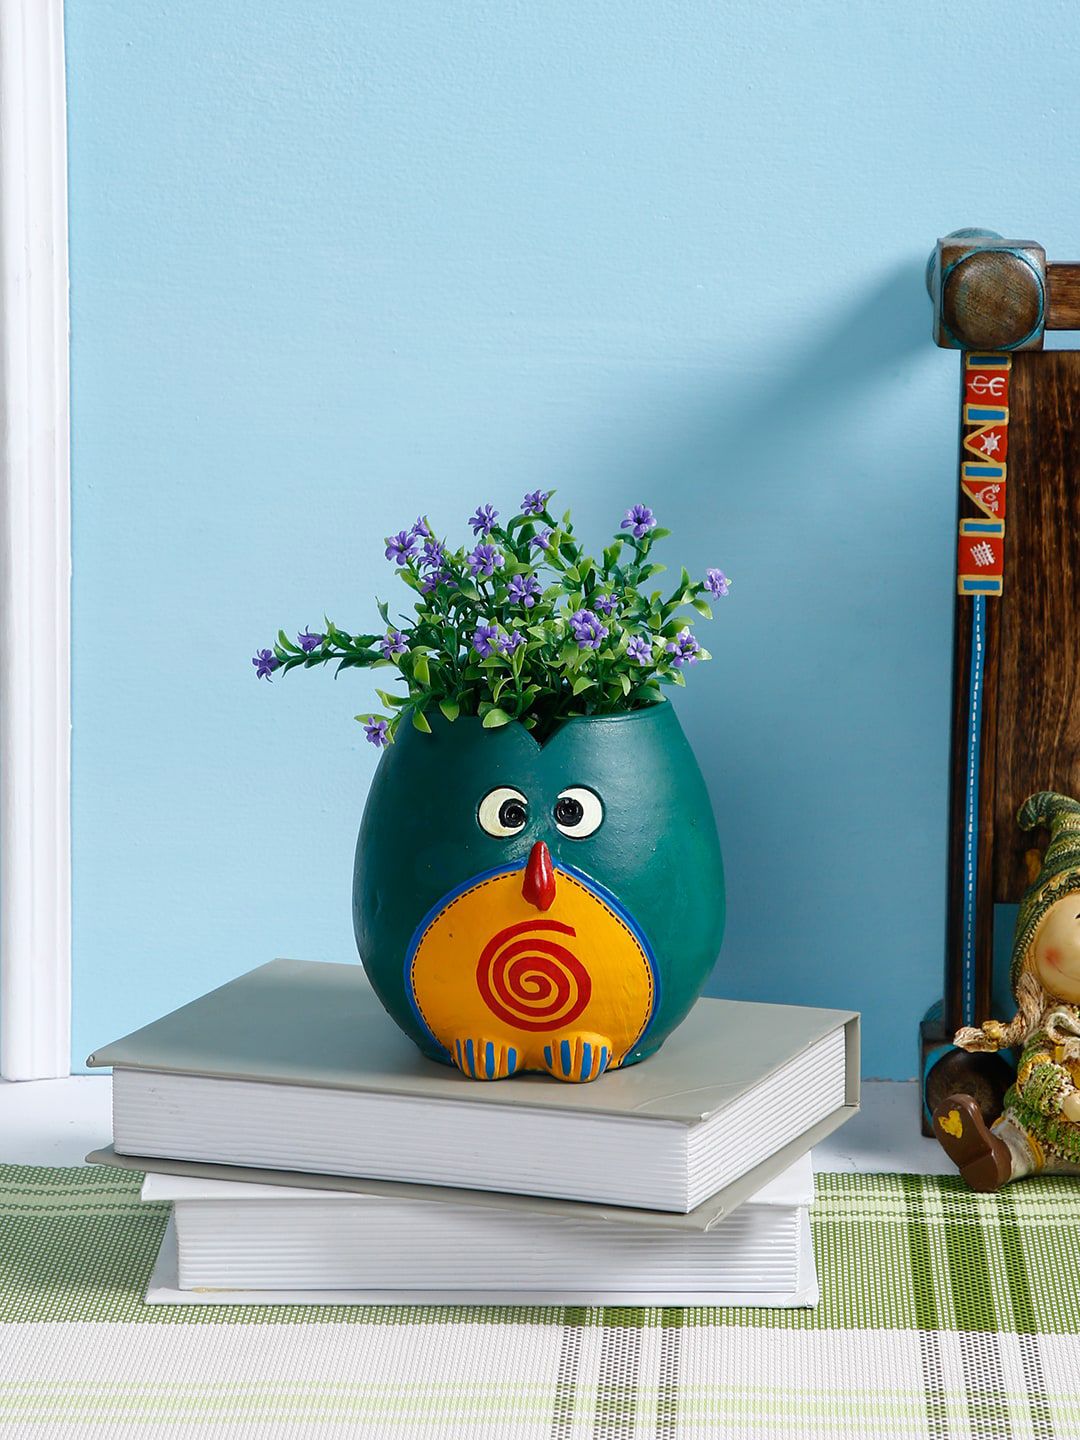 Aapno Rajasthan Teal Green & Yellow Handcrafted Owl Planter Price in India